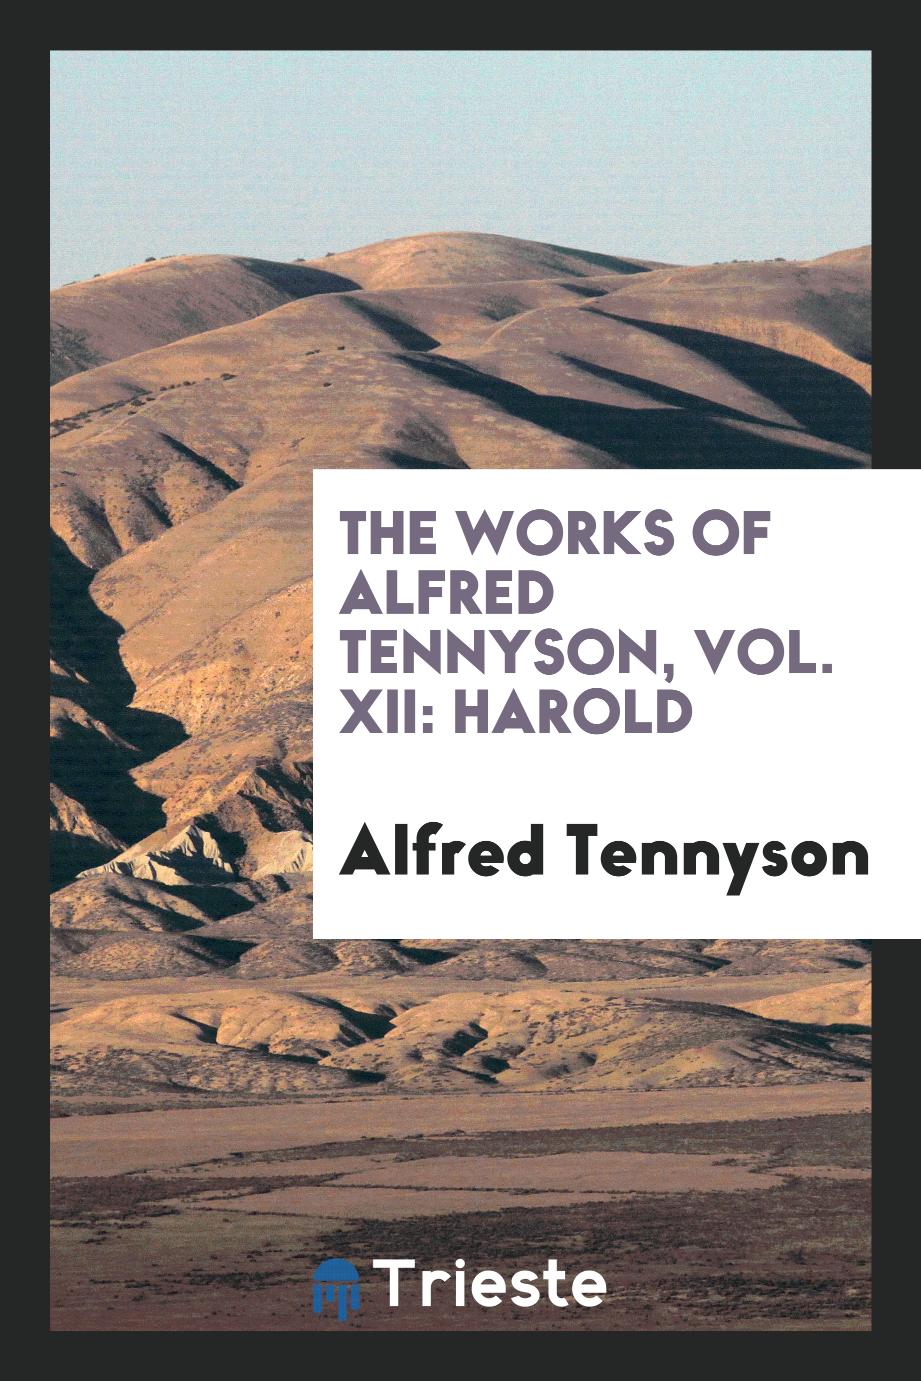 The Works of Alfred Tennyson, Vol. XII: Harold